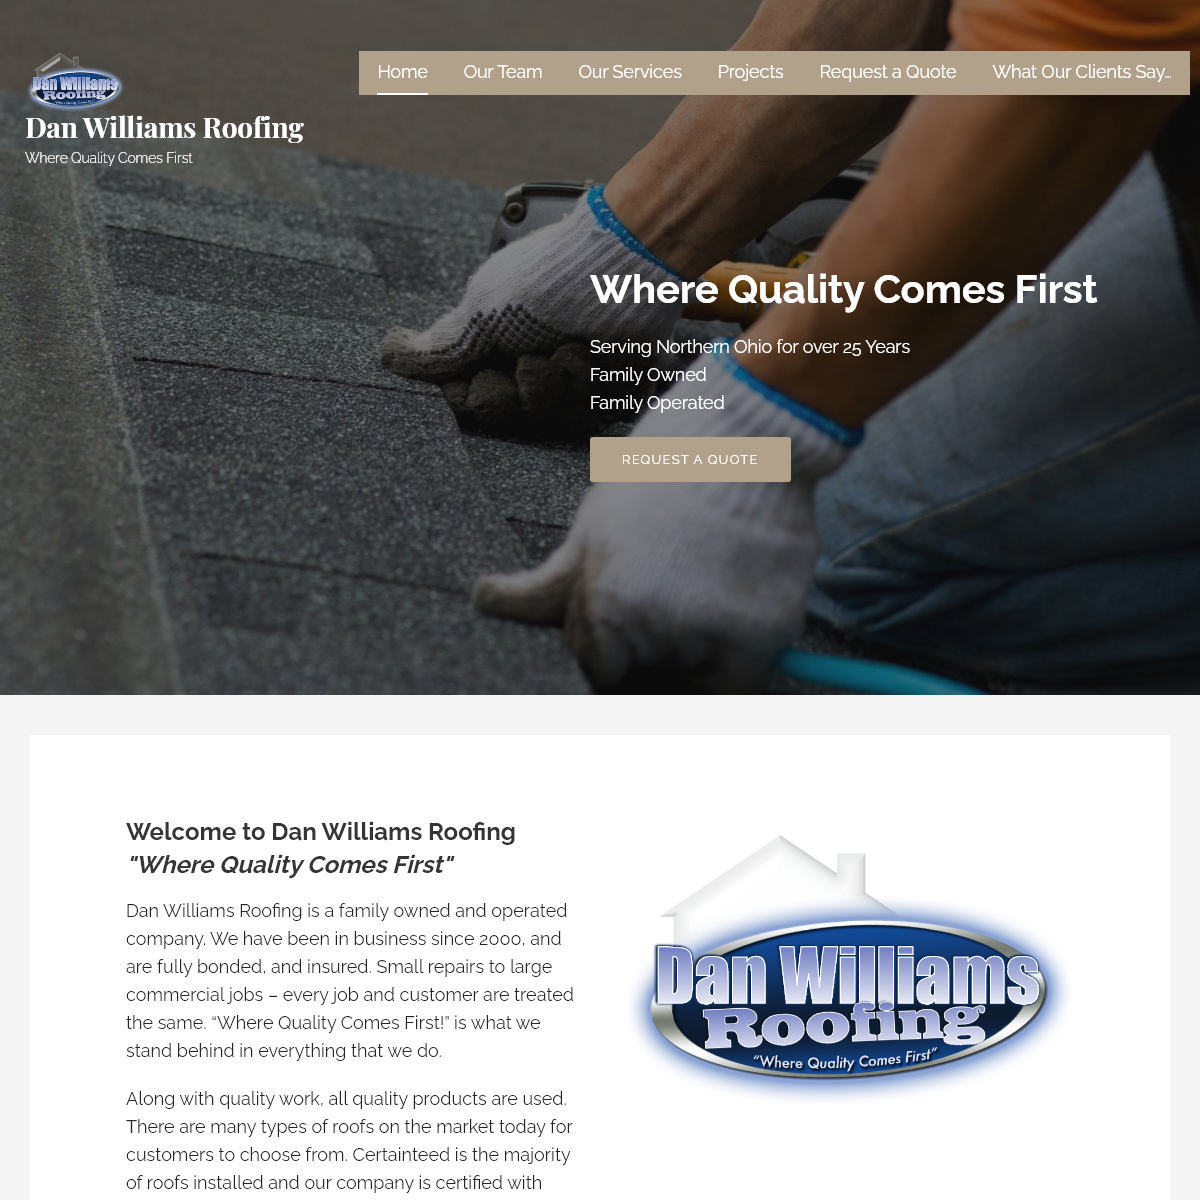 A complete backup of danwilliamsroofing.com